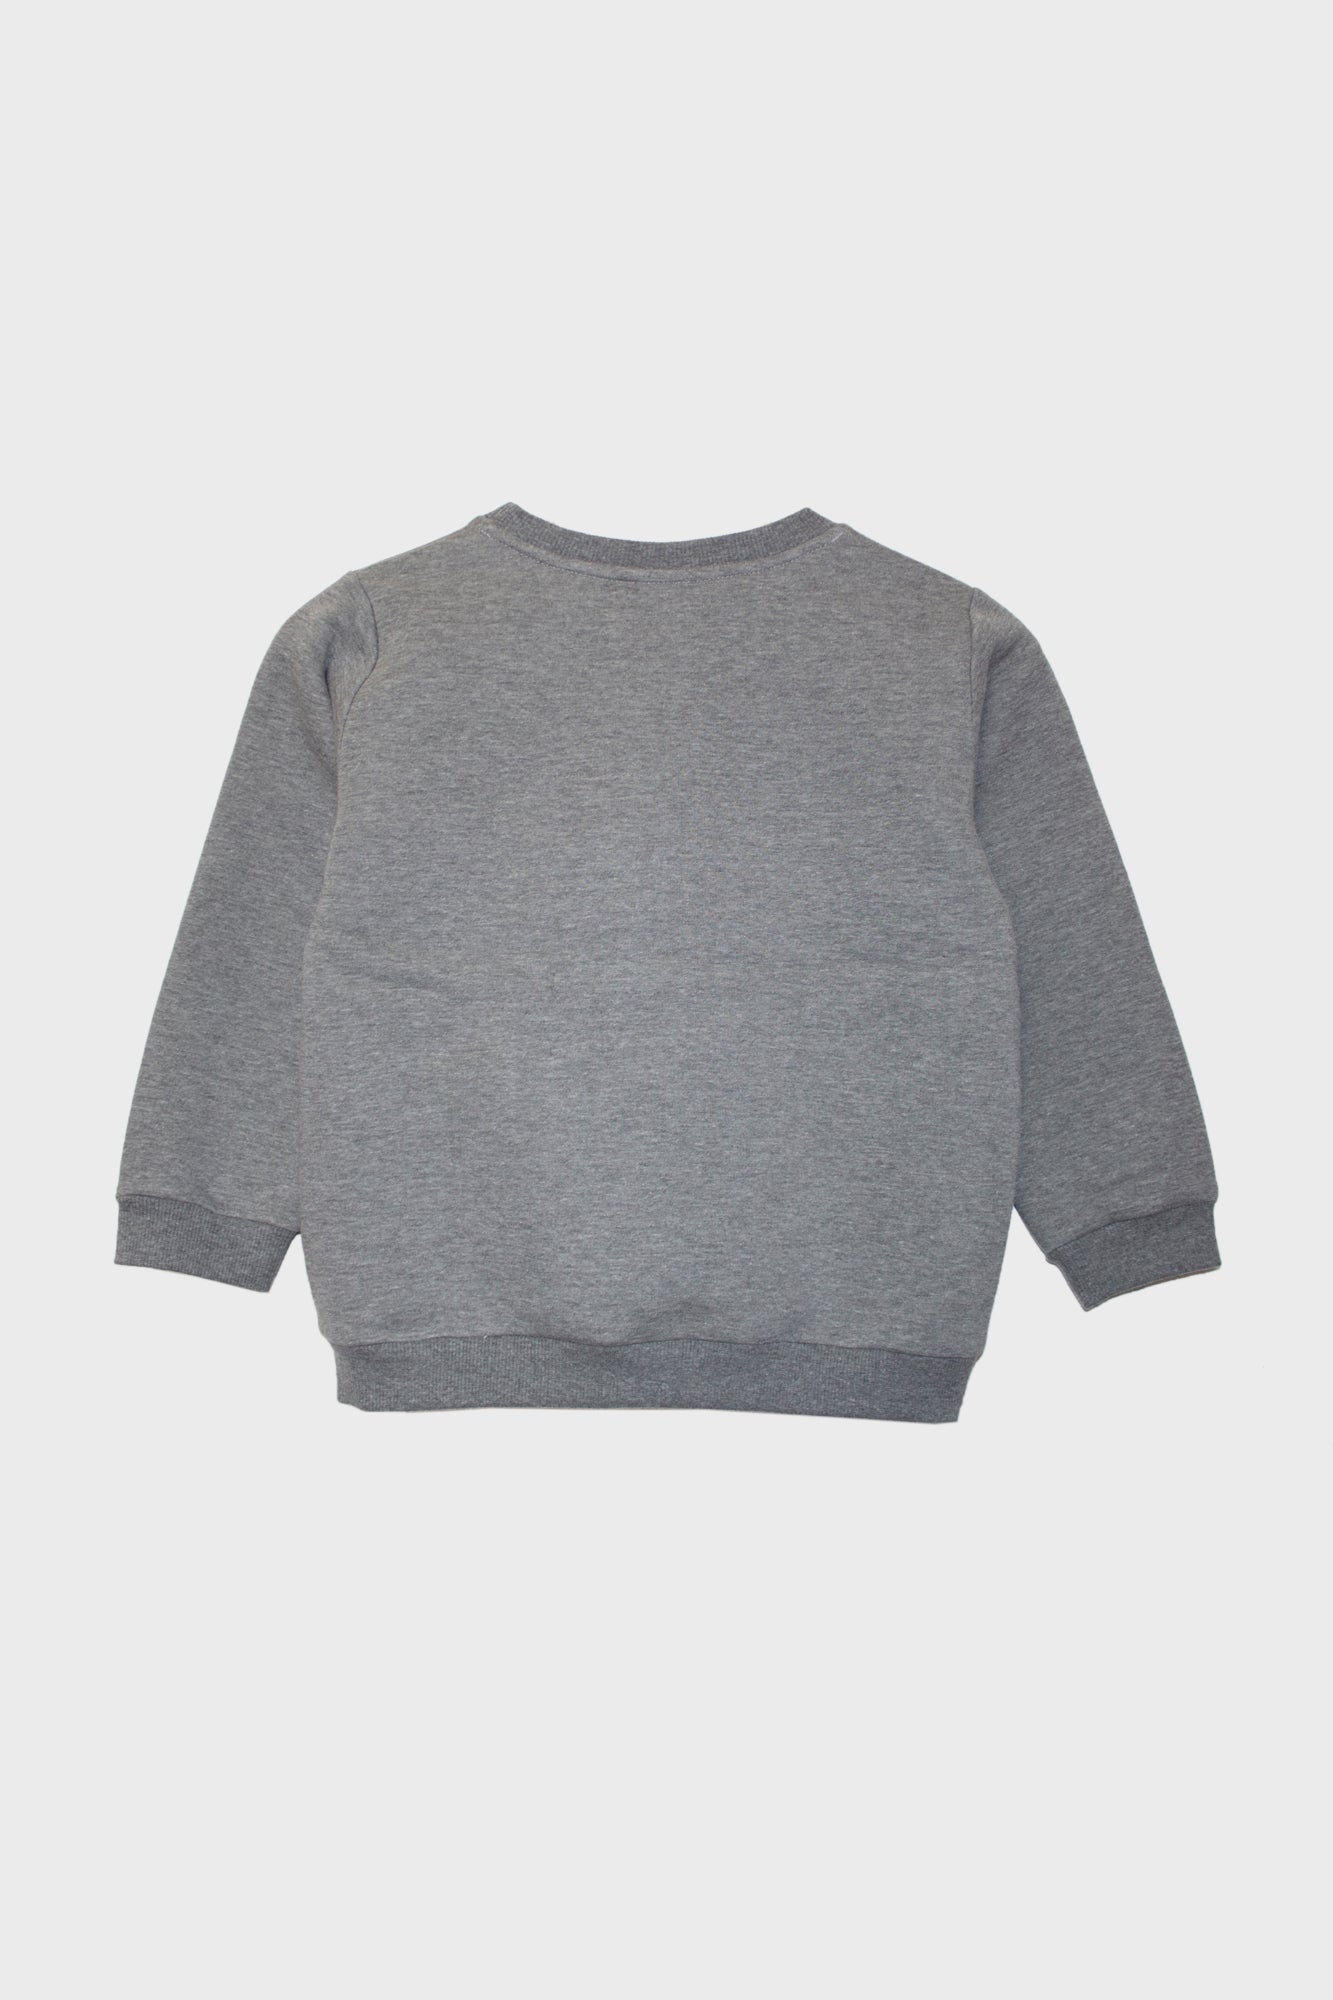 Kid’s One Wolf sweater, grey with white logo